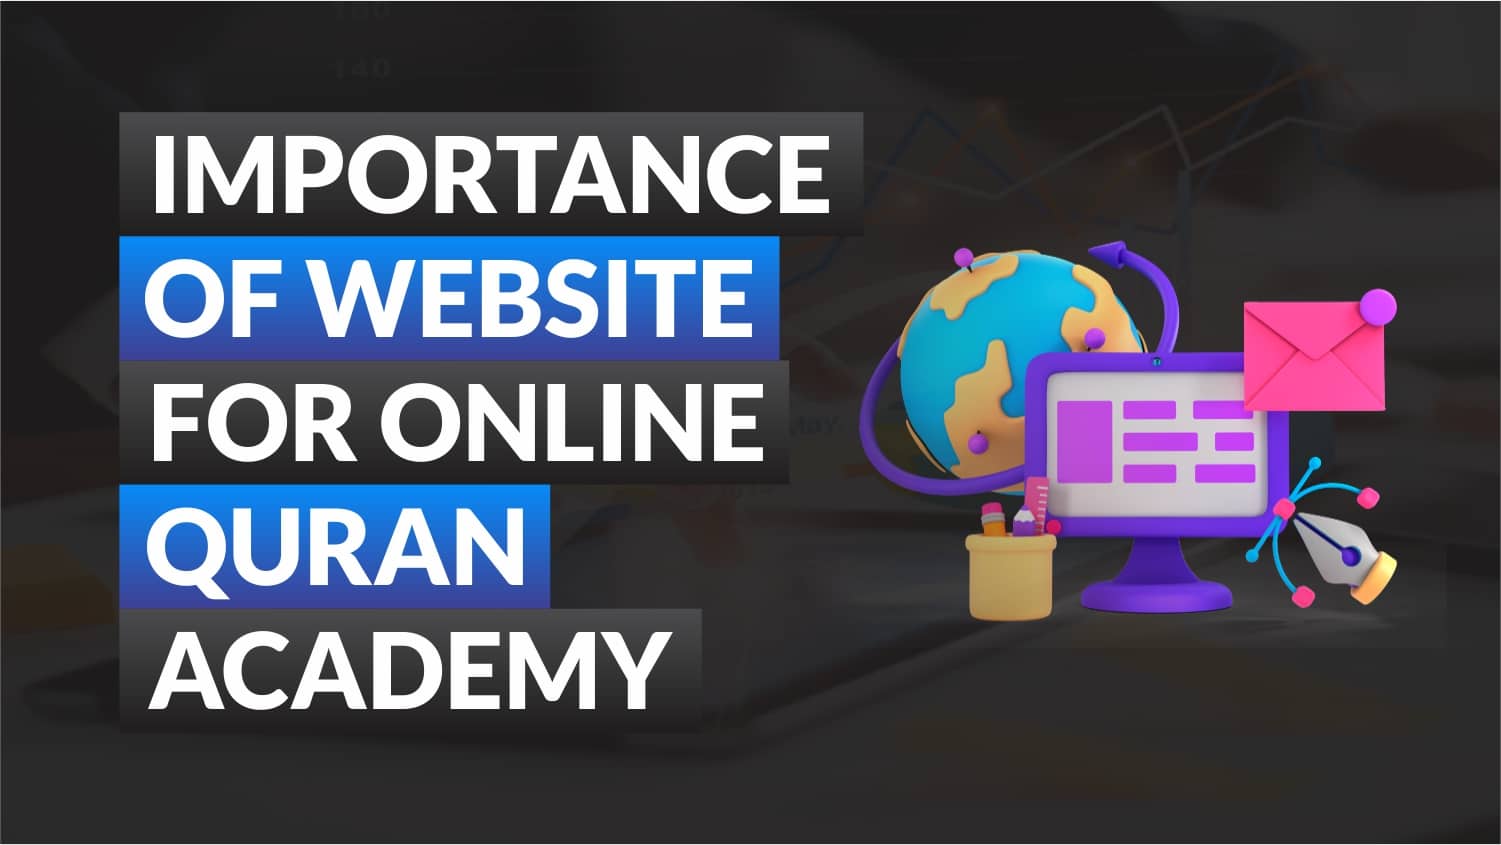 Importance of Website for Online Quran Academy English